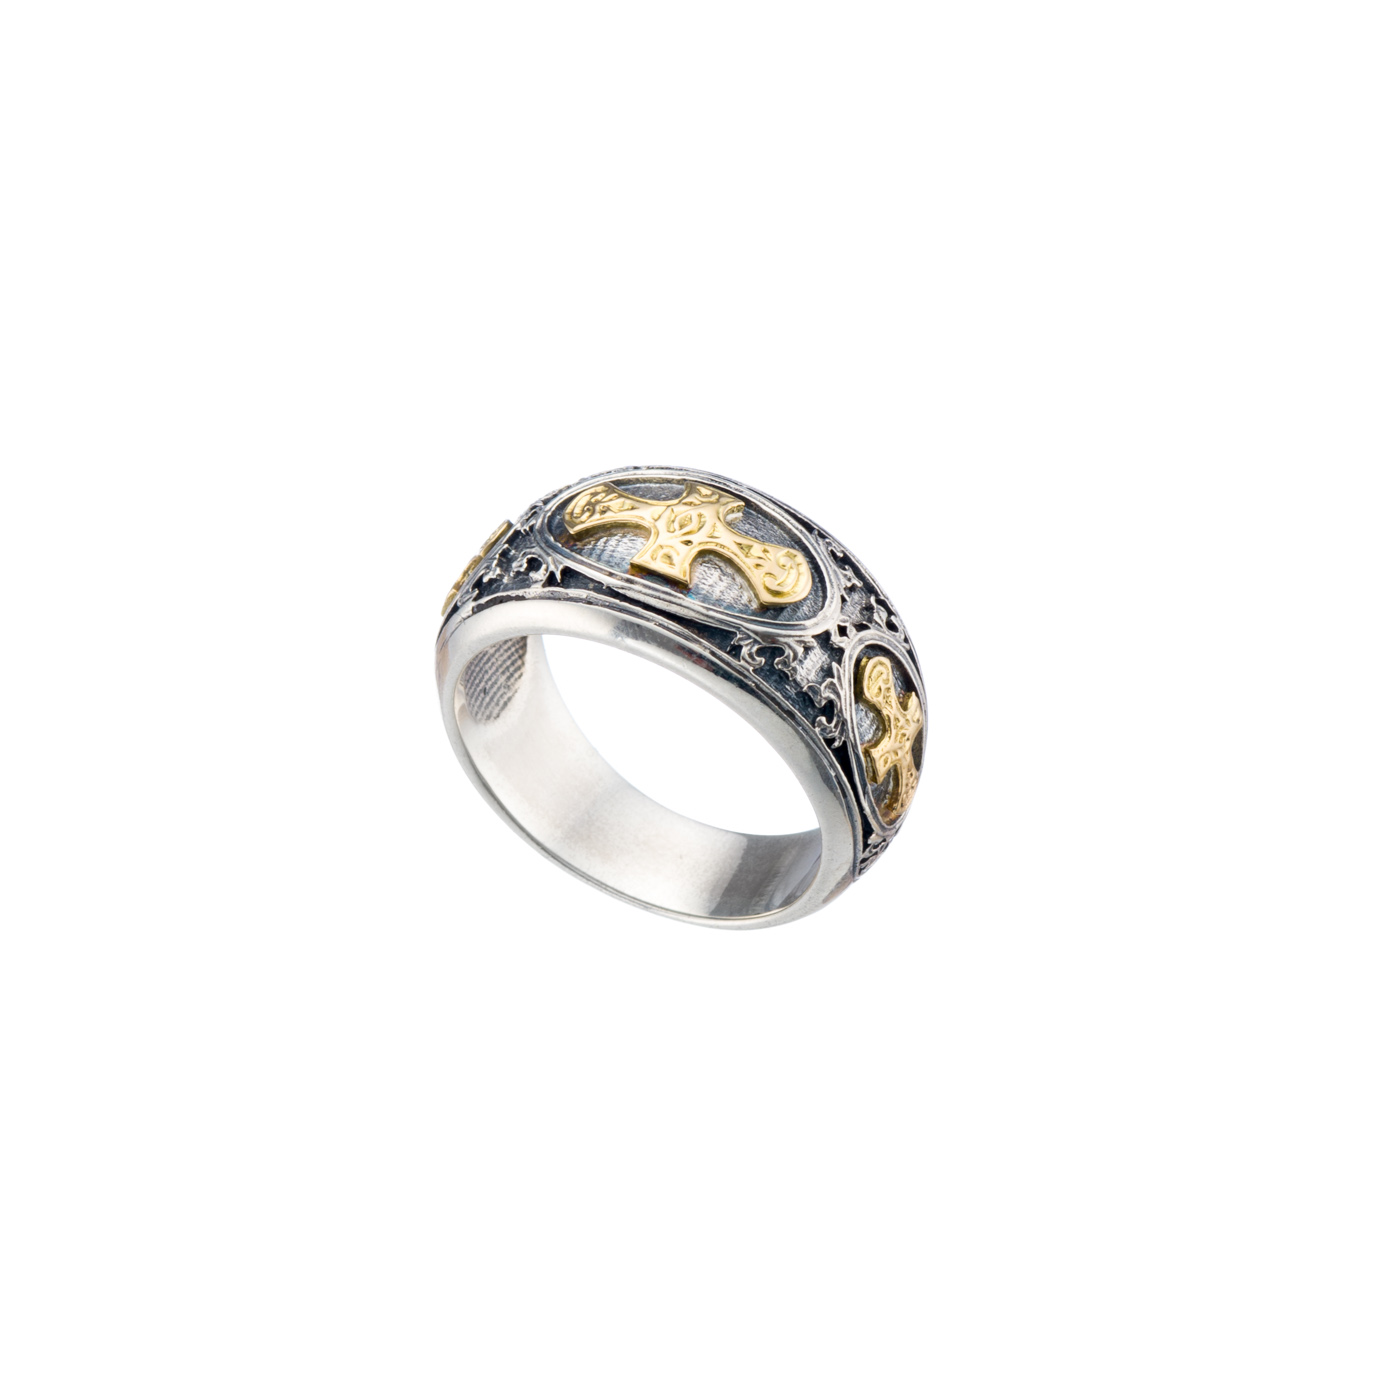 Patmos Ring in 18K Gold and Sterling Silver